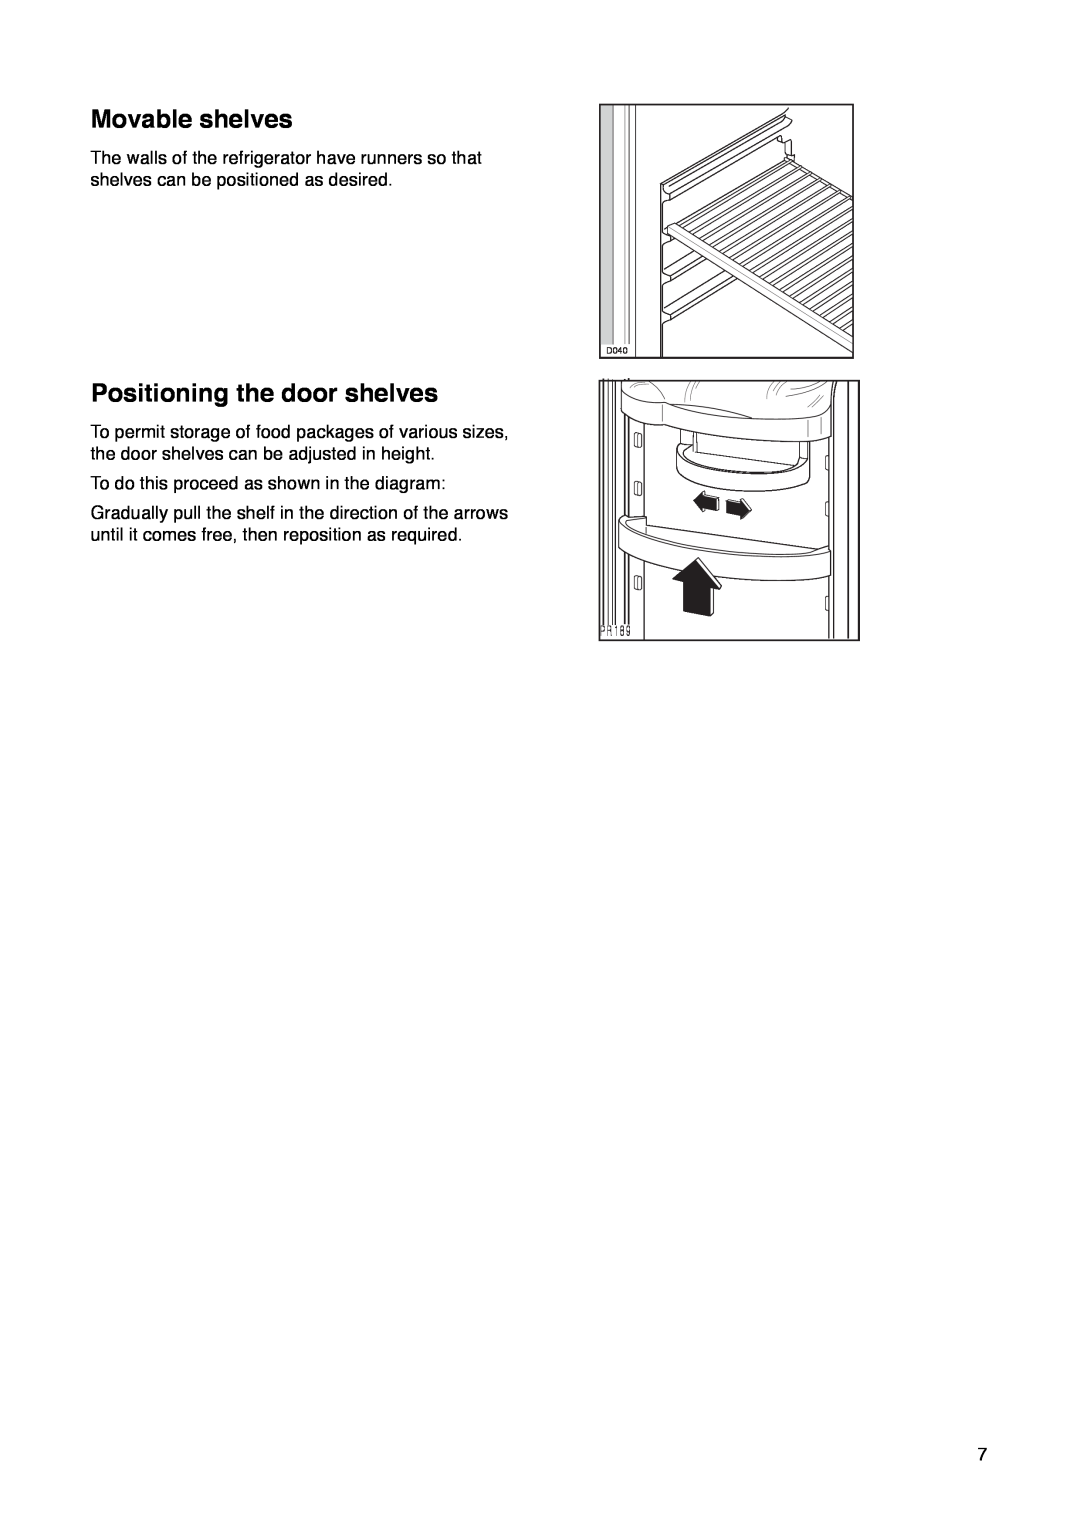 Tricity Bendix FD 852 A installation instructions Movable shelves, Positioning the door shelves 